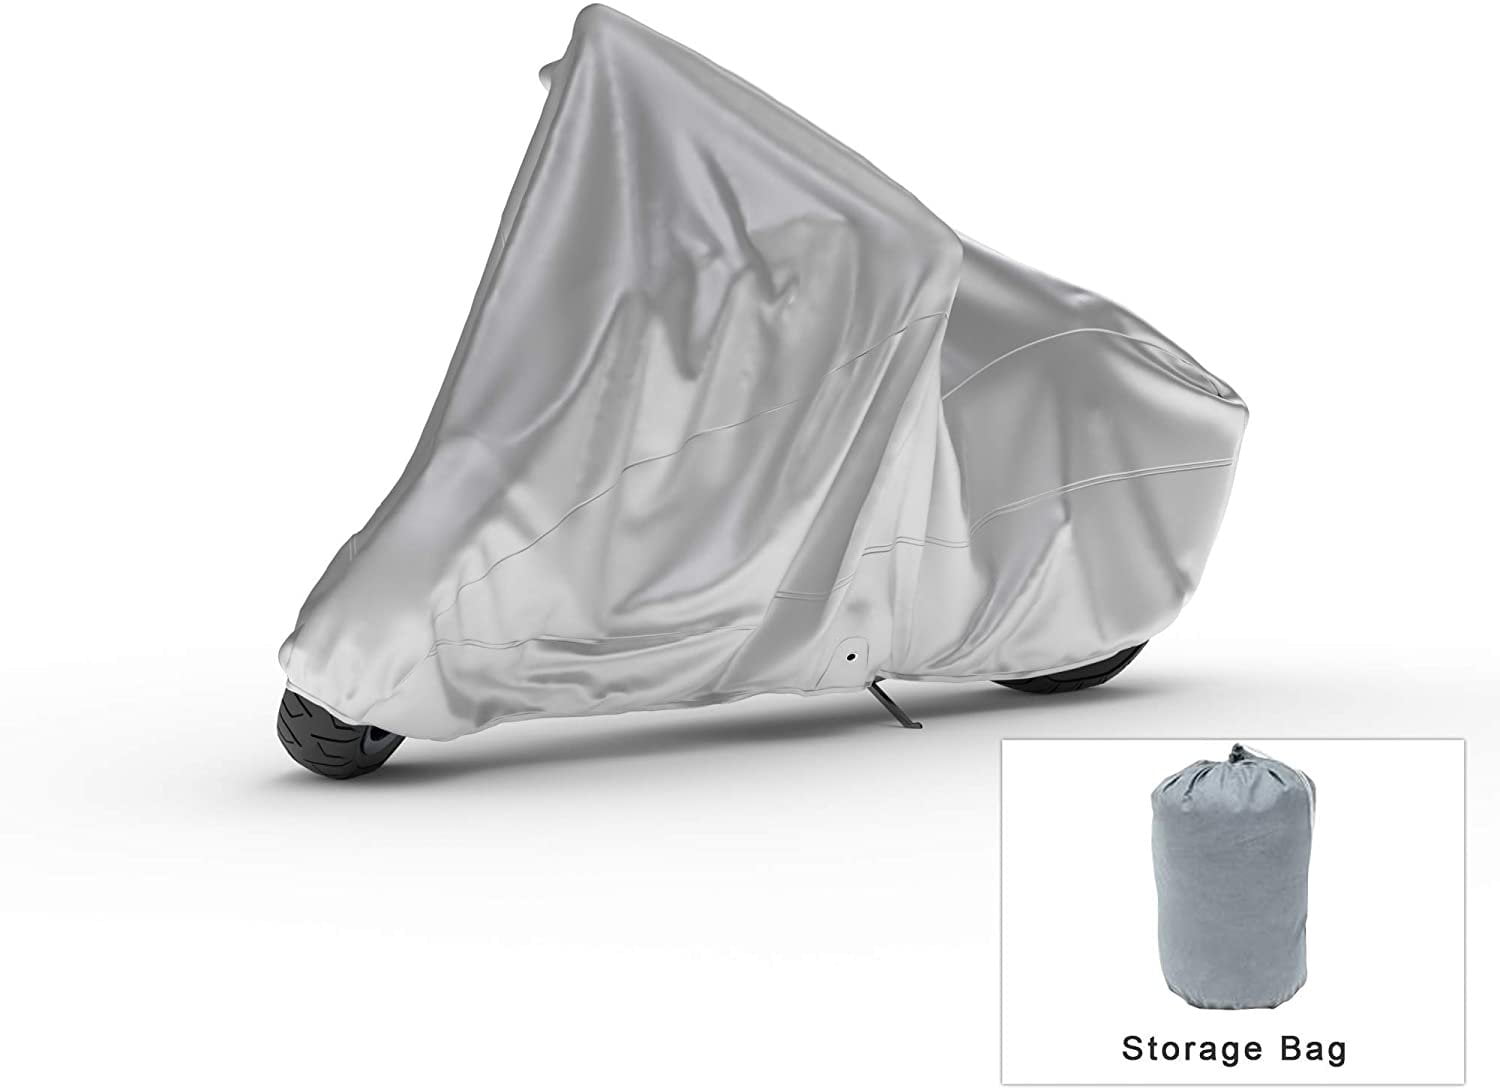 SUPER HEAVY-DUTY MOTORCYCLE COVER FOR Yamaha Road Star Midnight Warrior 2005 